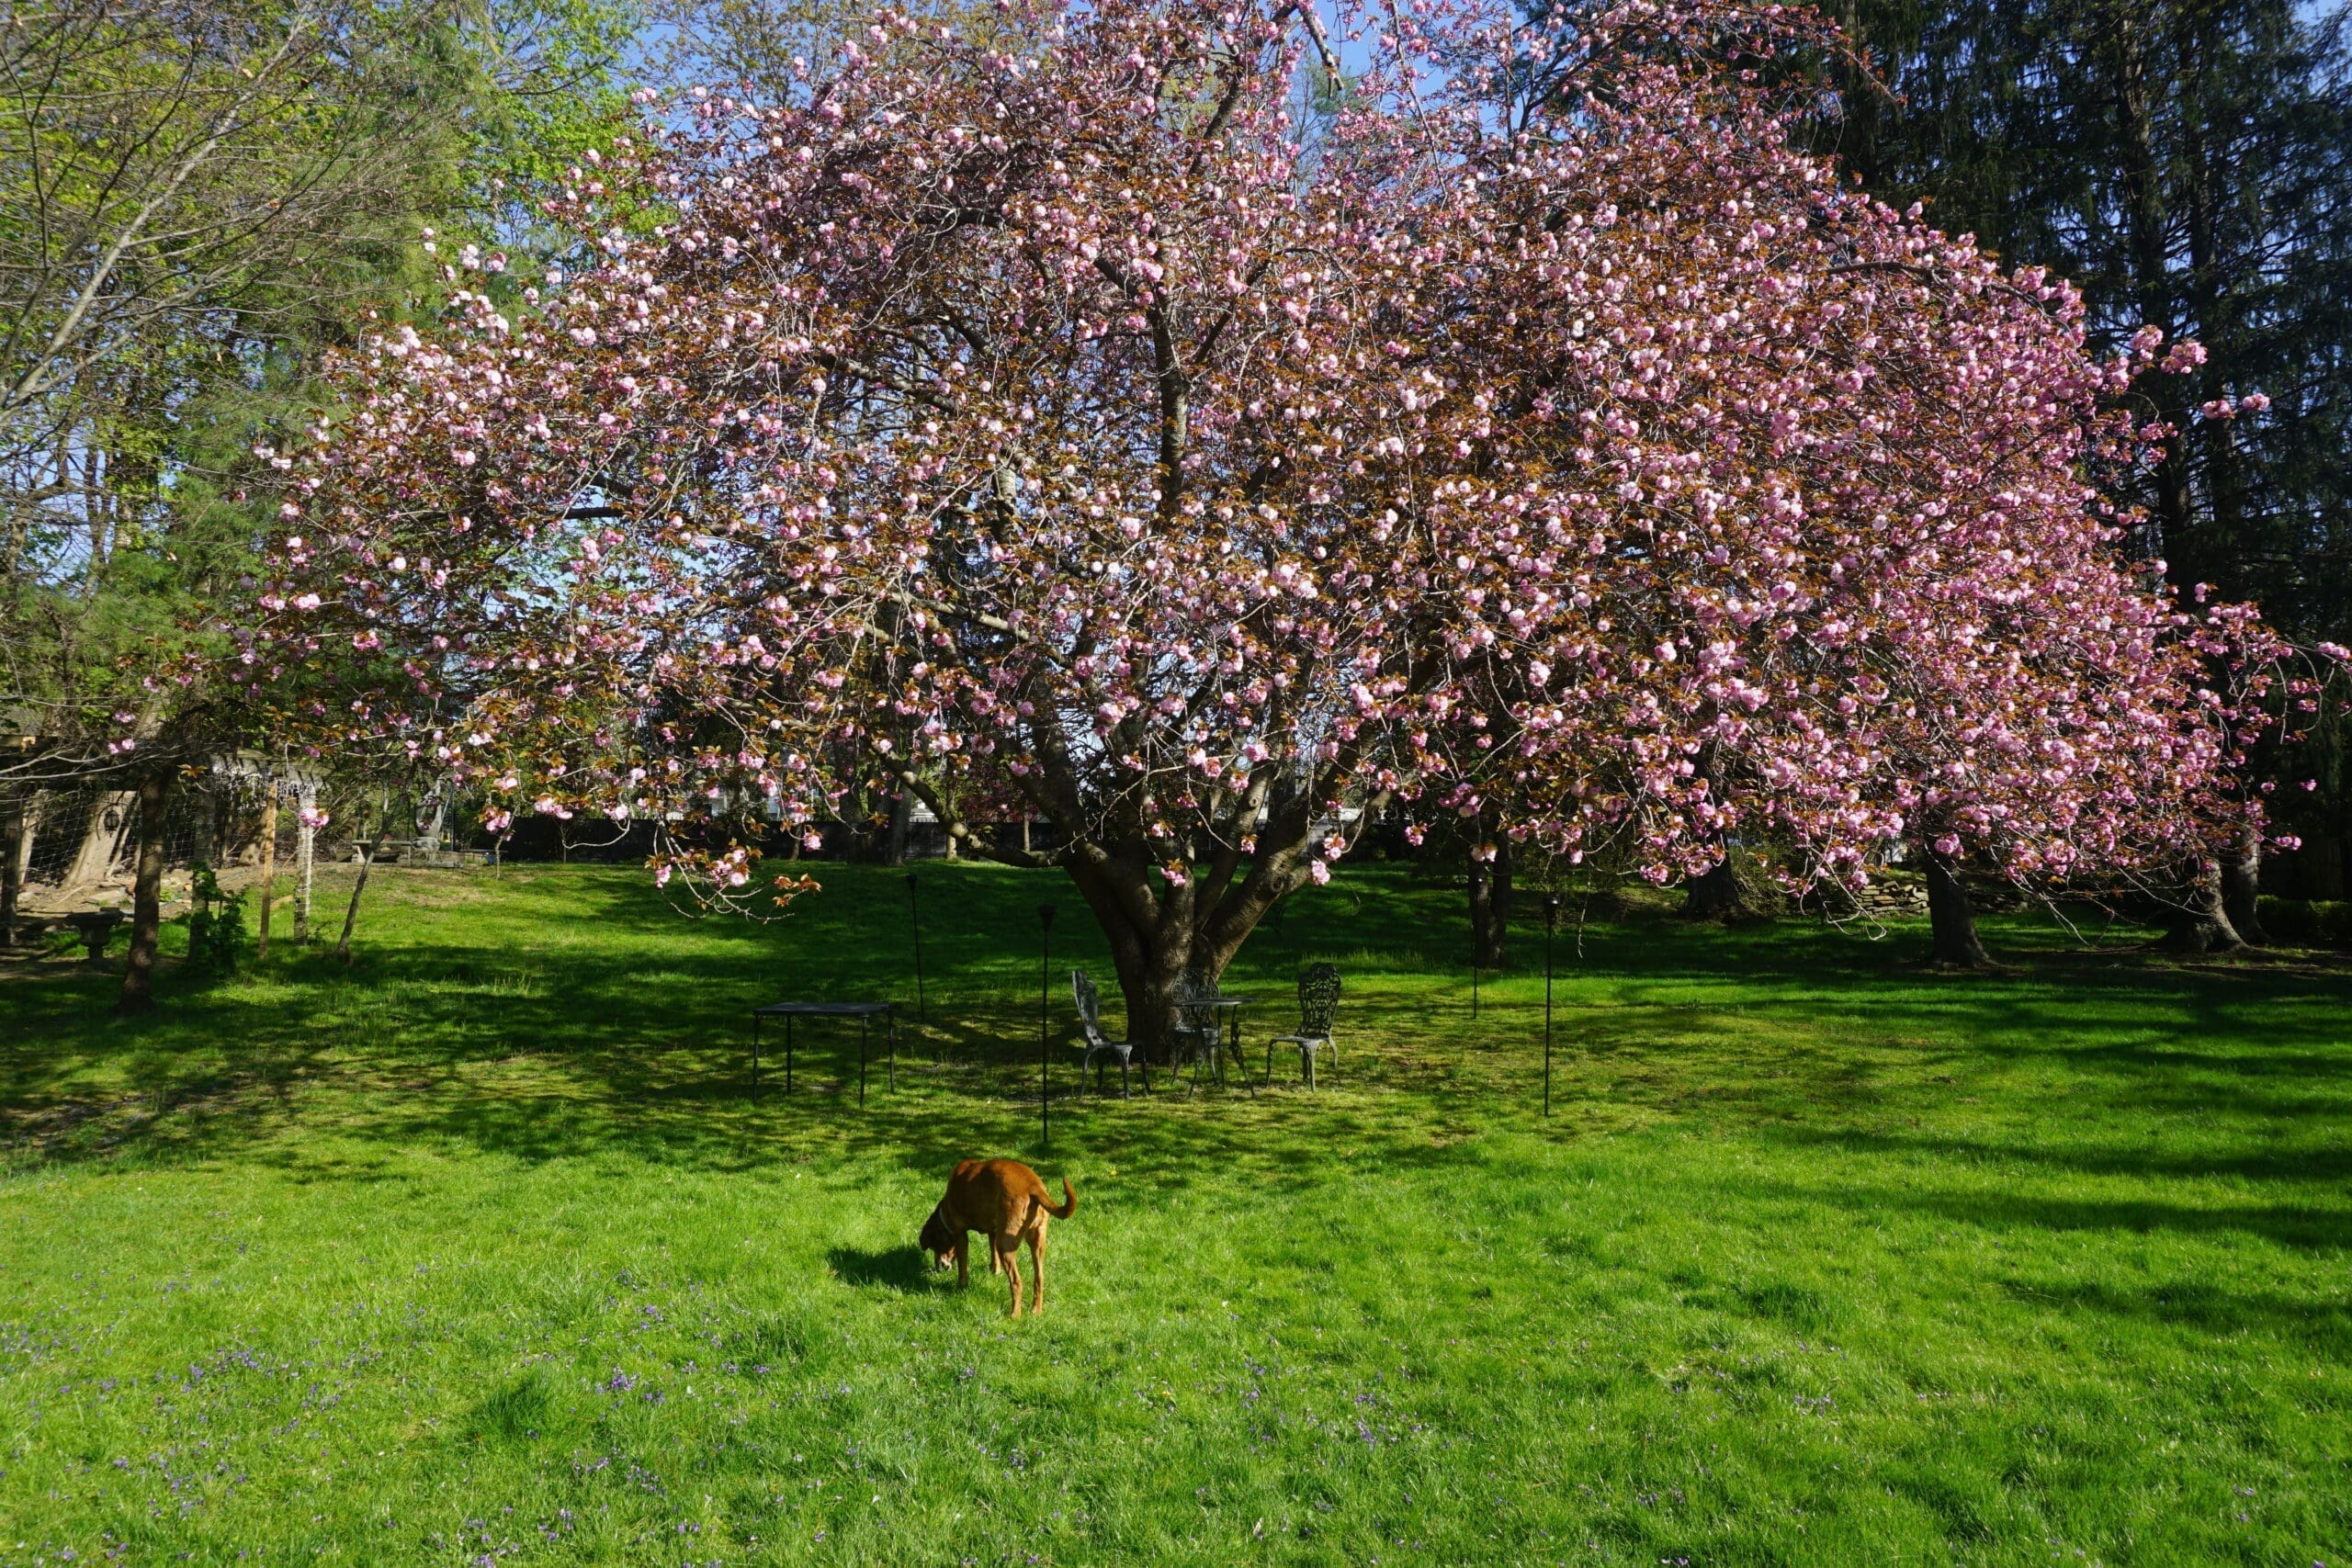 Cherry Tree on property in blossom with dog running in fenced yard.